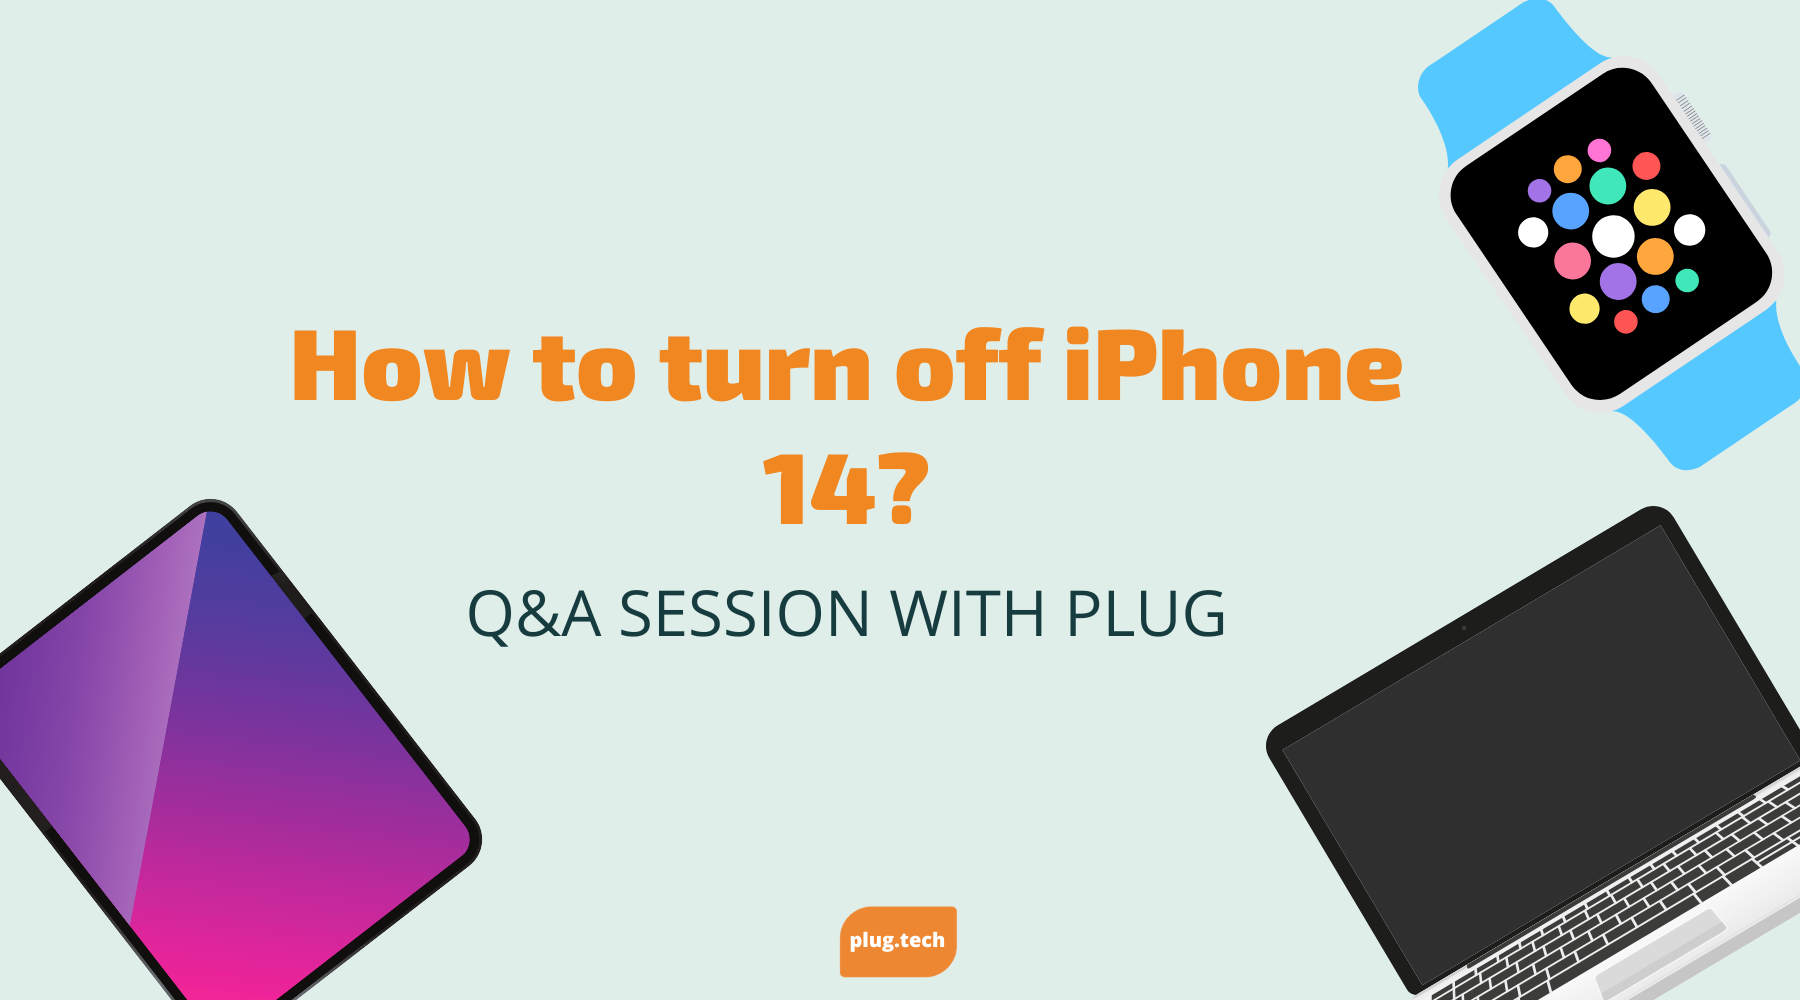 How to turn off iPhone 14?